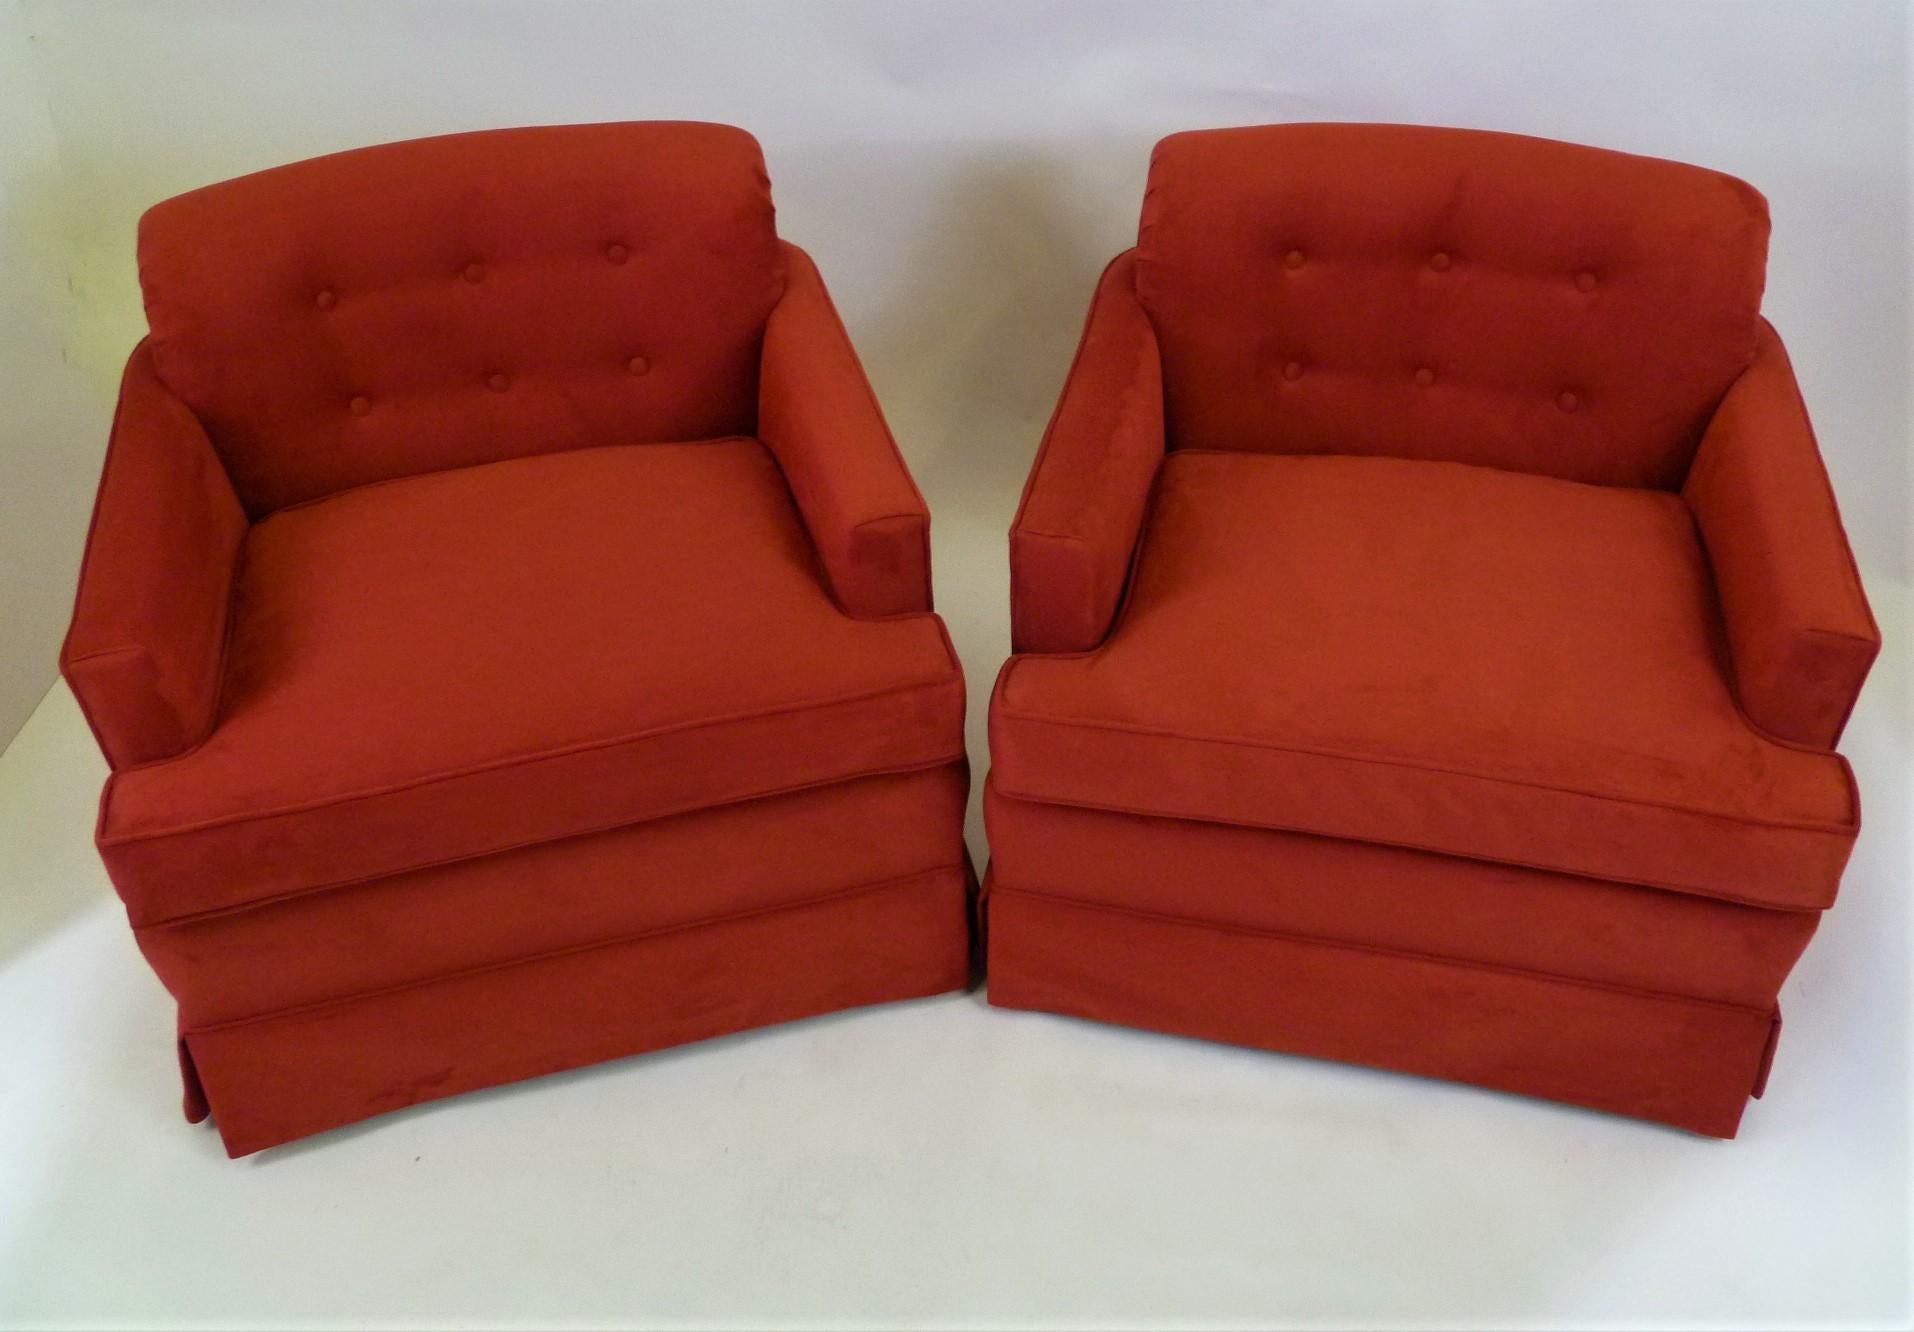 Here a pair of finely crafted Hollywood Regency club chairs or armchairs from the 1940s from noted Pasadena furniture maker Elwood W. Crane & Son. Re-upholstered in a ruby red ultrasuede, with button tuft back, they have a sophisticated low lounge